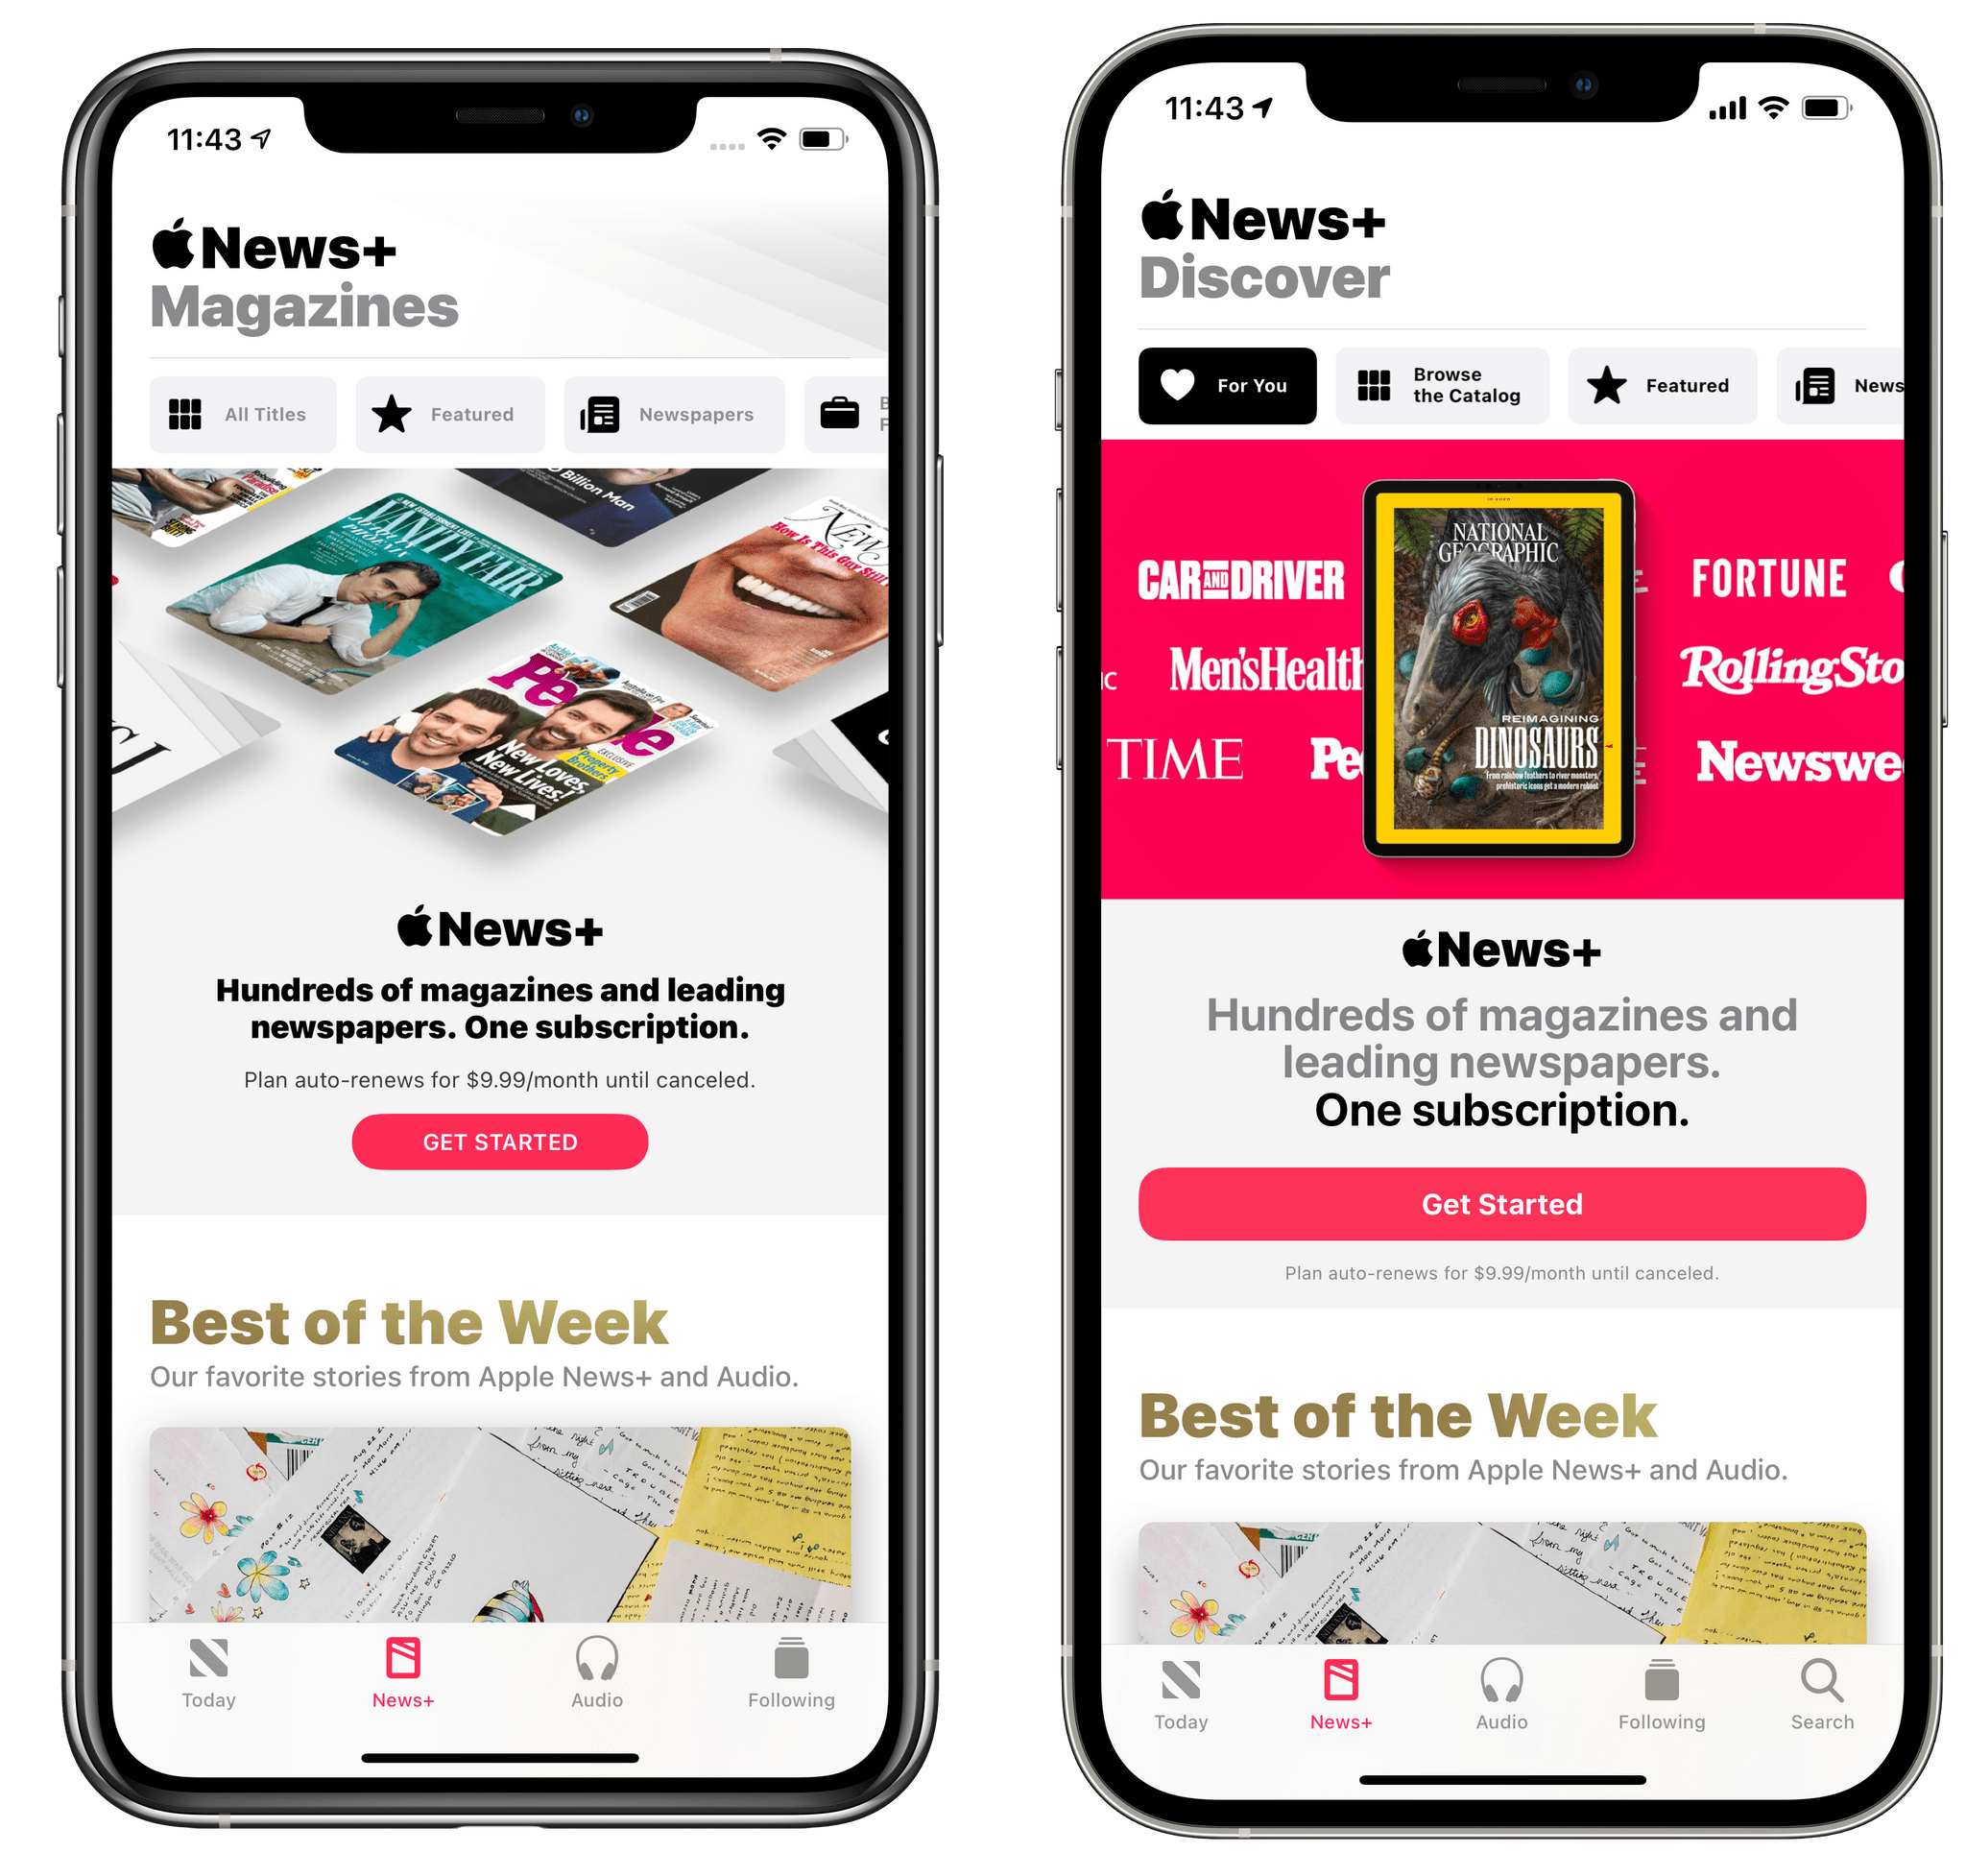 Apple News in iOS 14.5 (right) features a tweaked News+ page along with a dedicated Search tab.